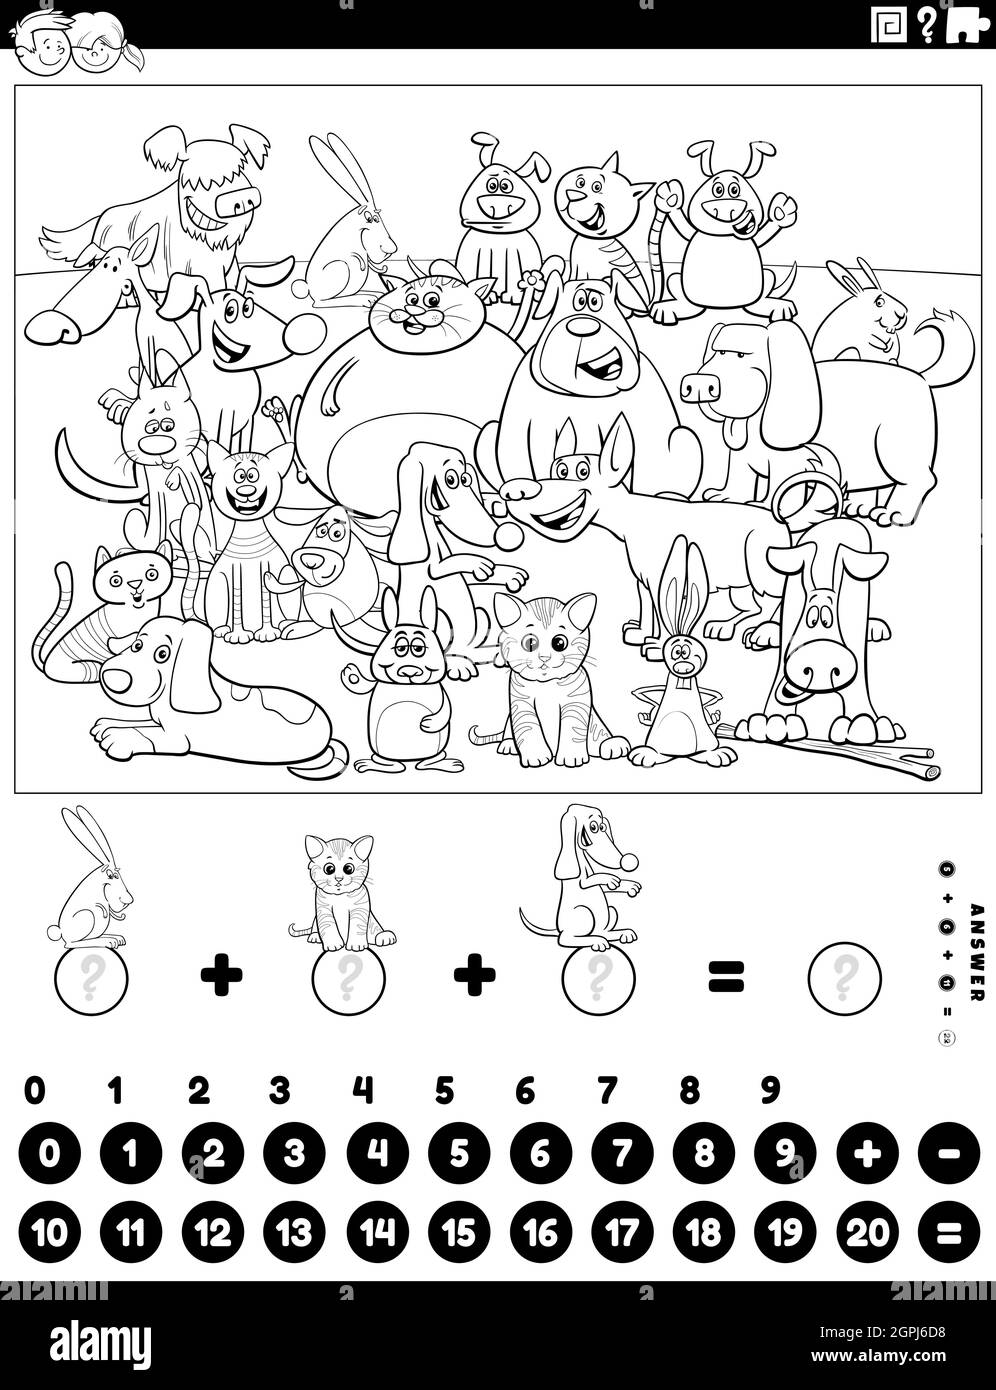 counting and adding game with animals coloring book page Stock ...